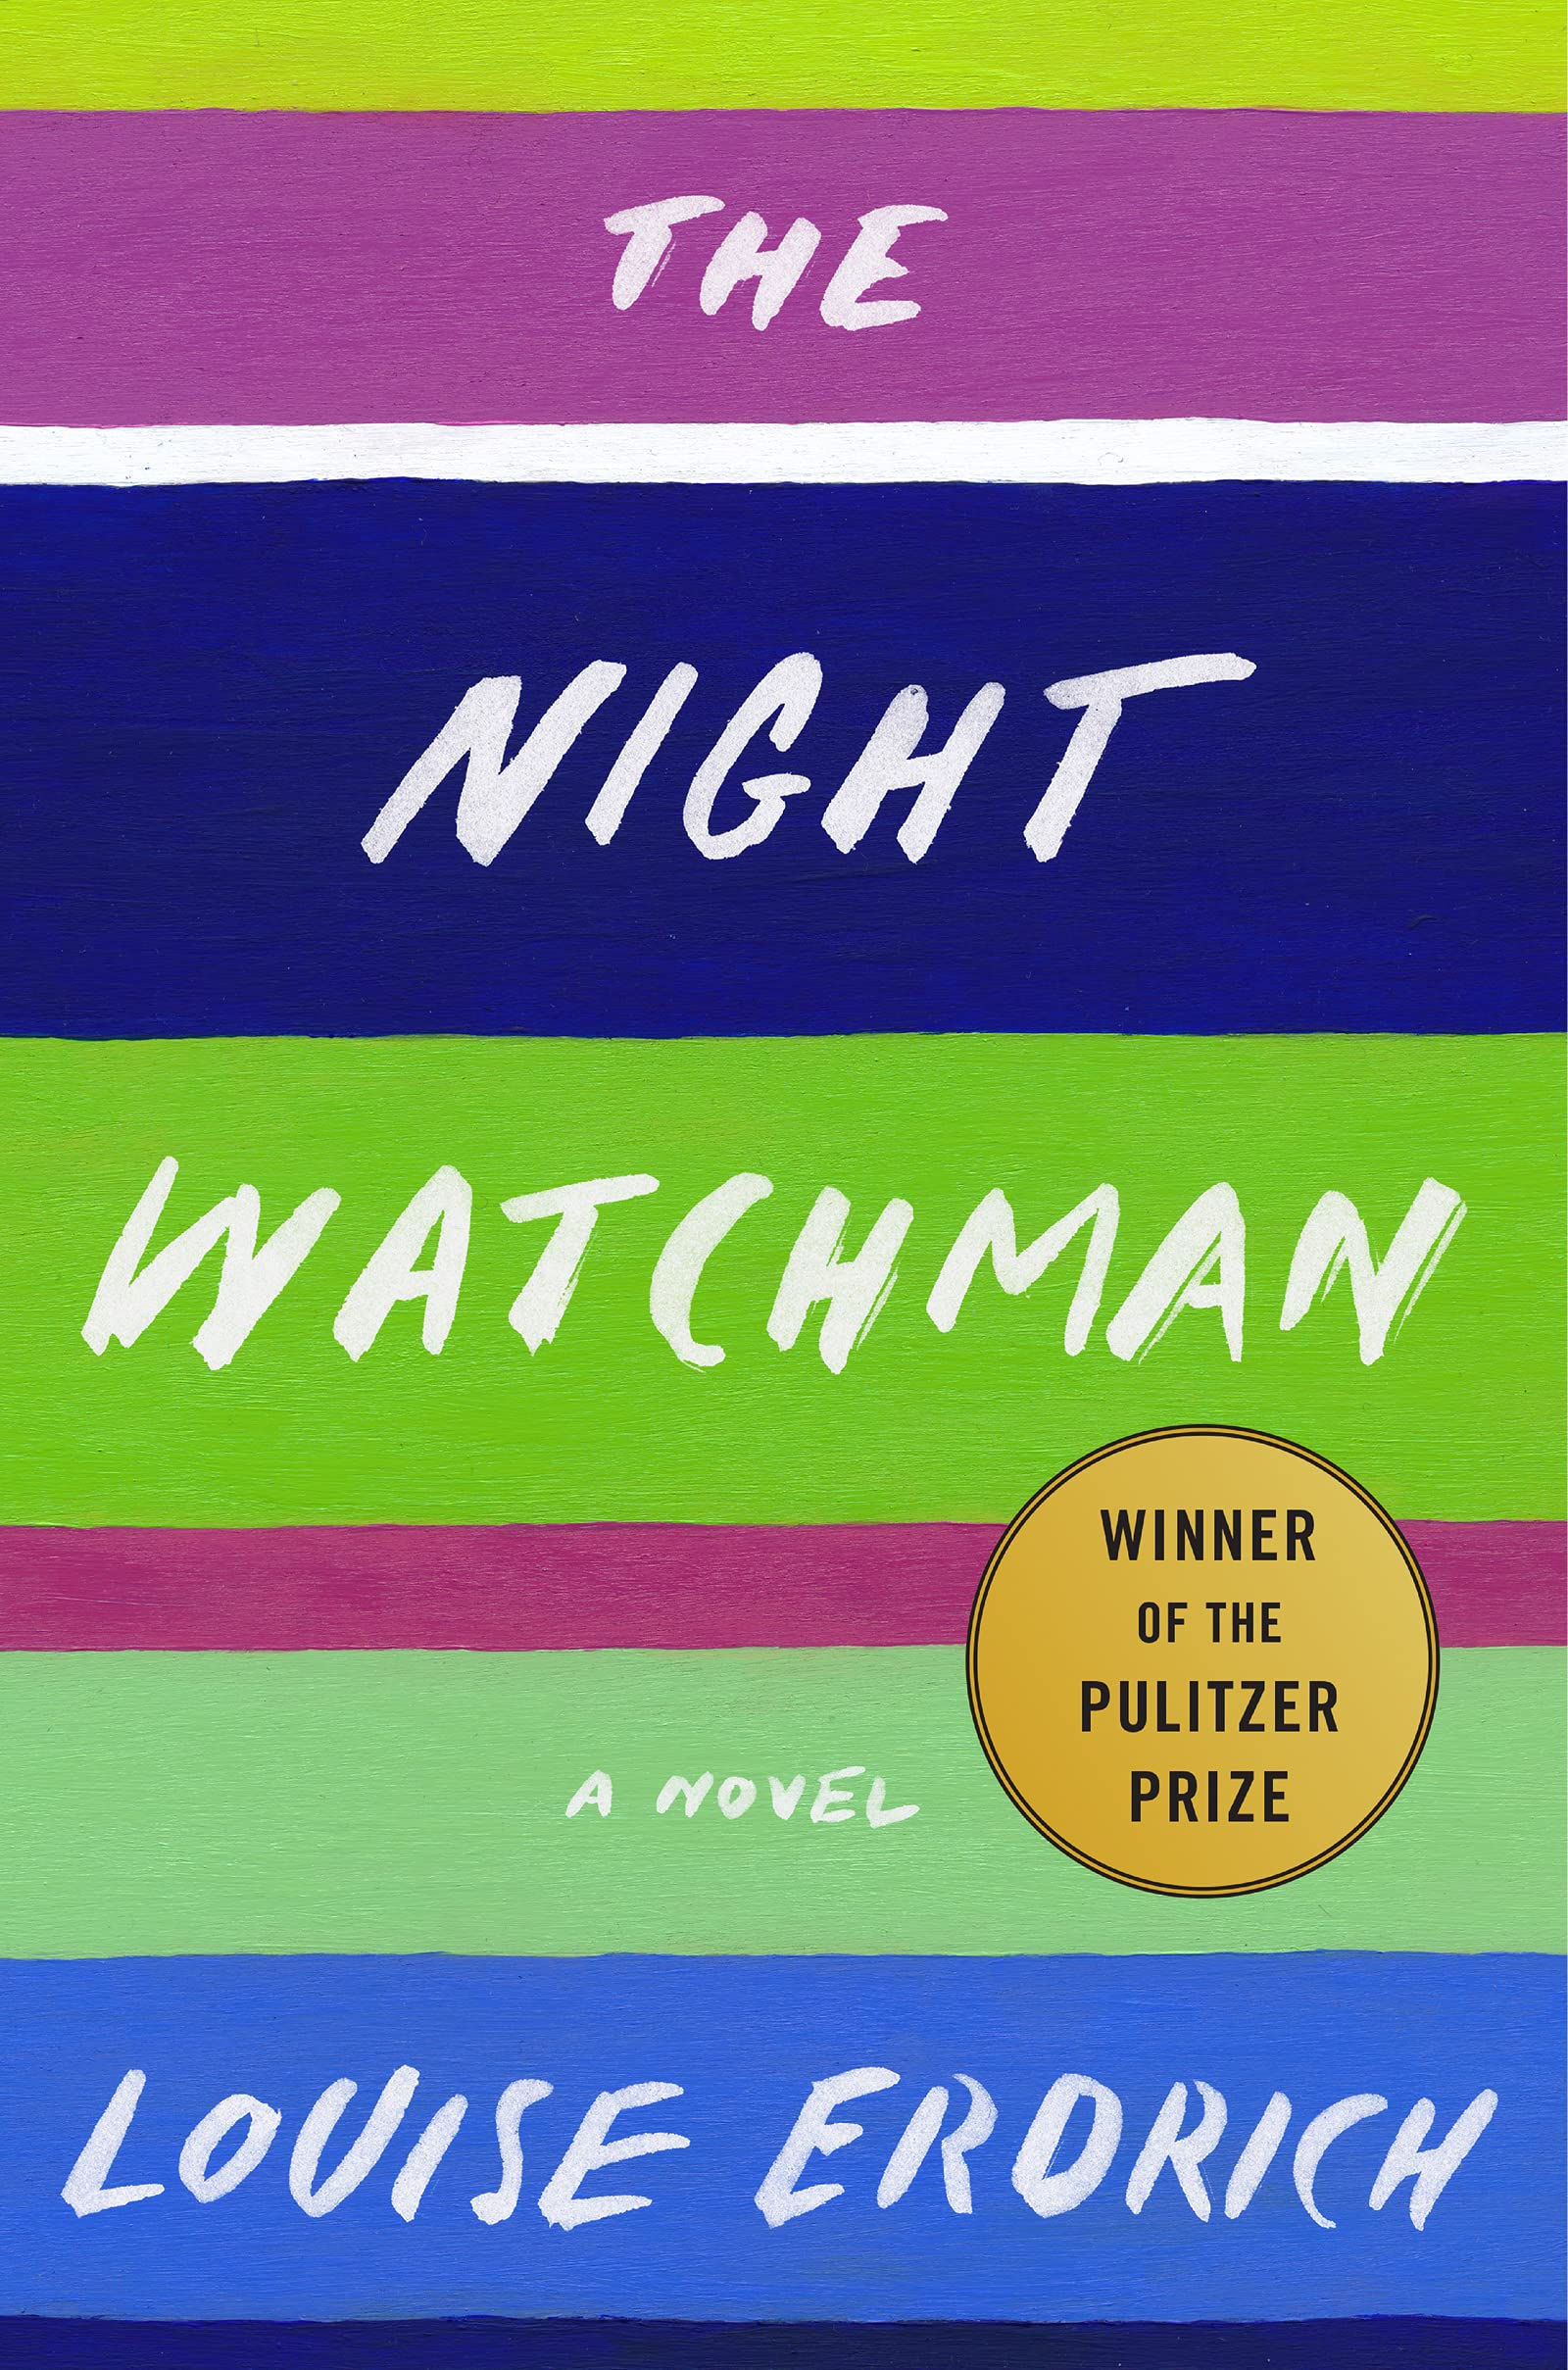 book cover for The Night Watchman - purple blue and green stripes with the title and author name in white